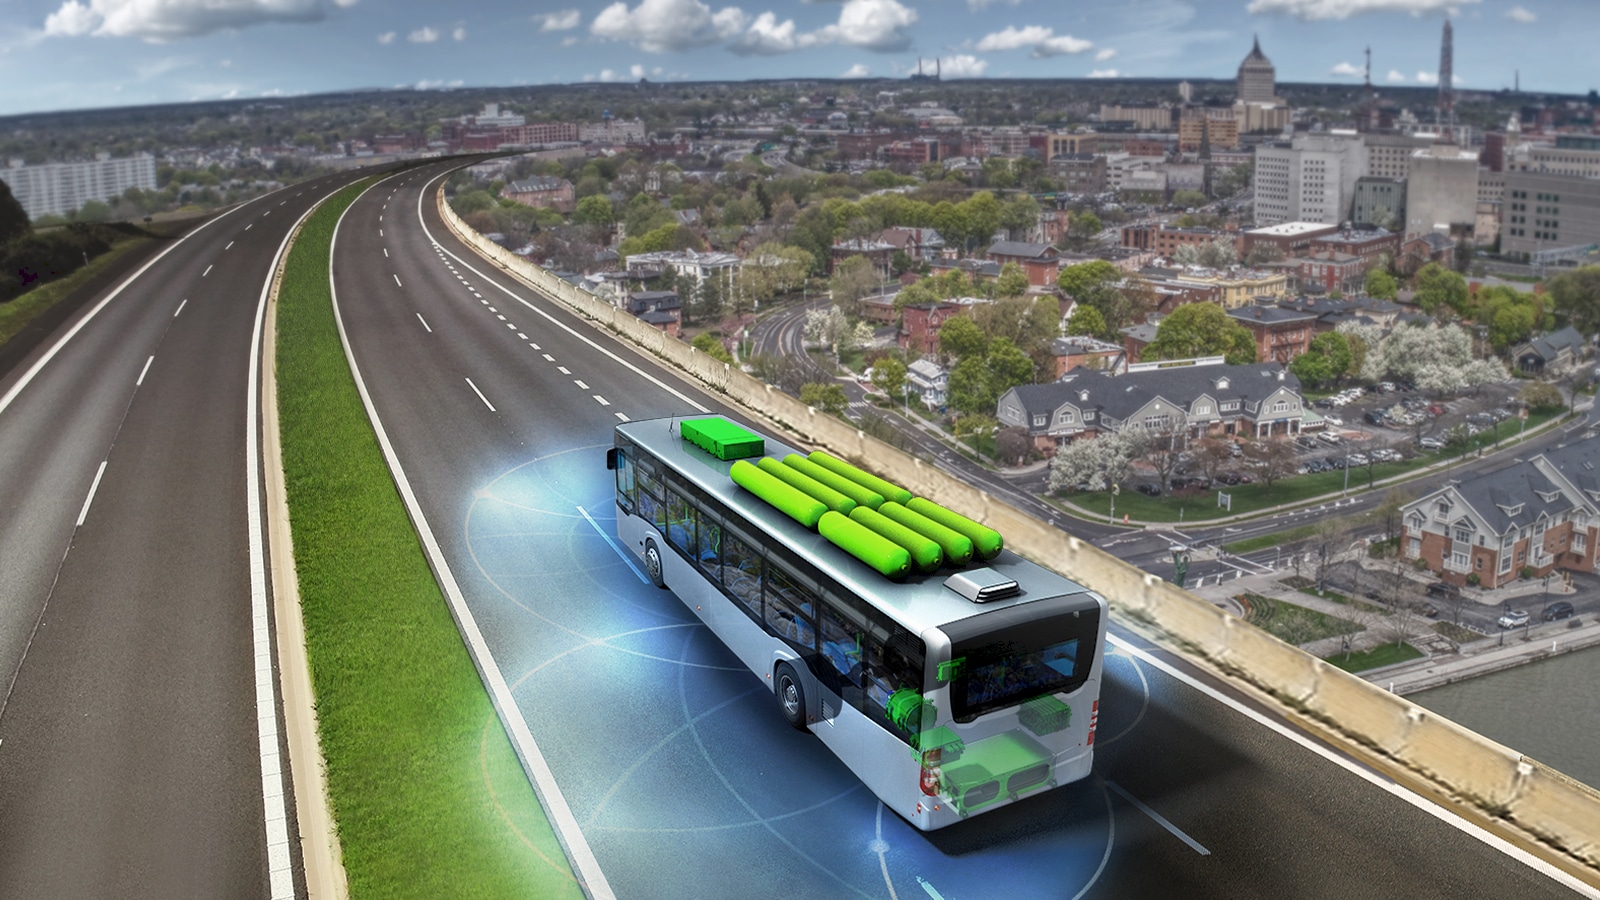 BAE Systems to Power Hydrogen Fuel Cell Buses in Rochester, New York